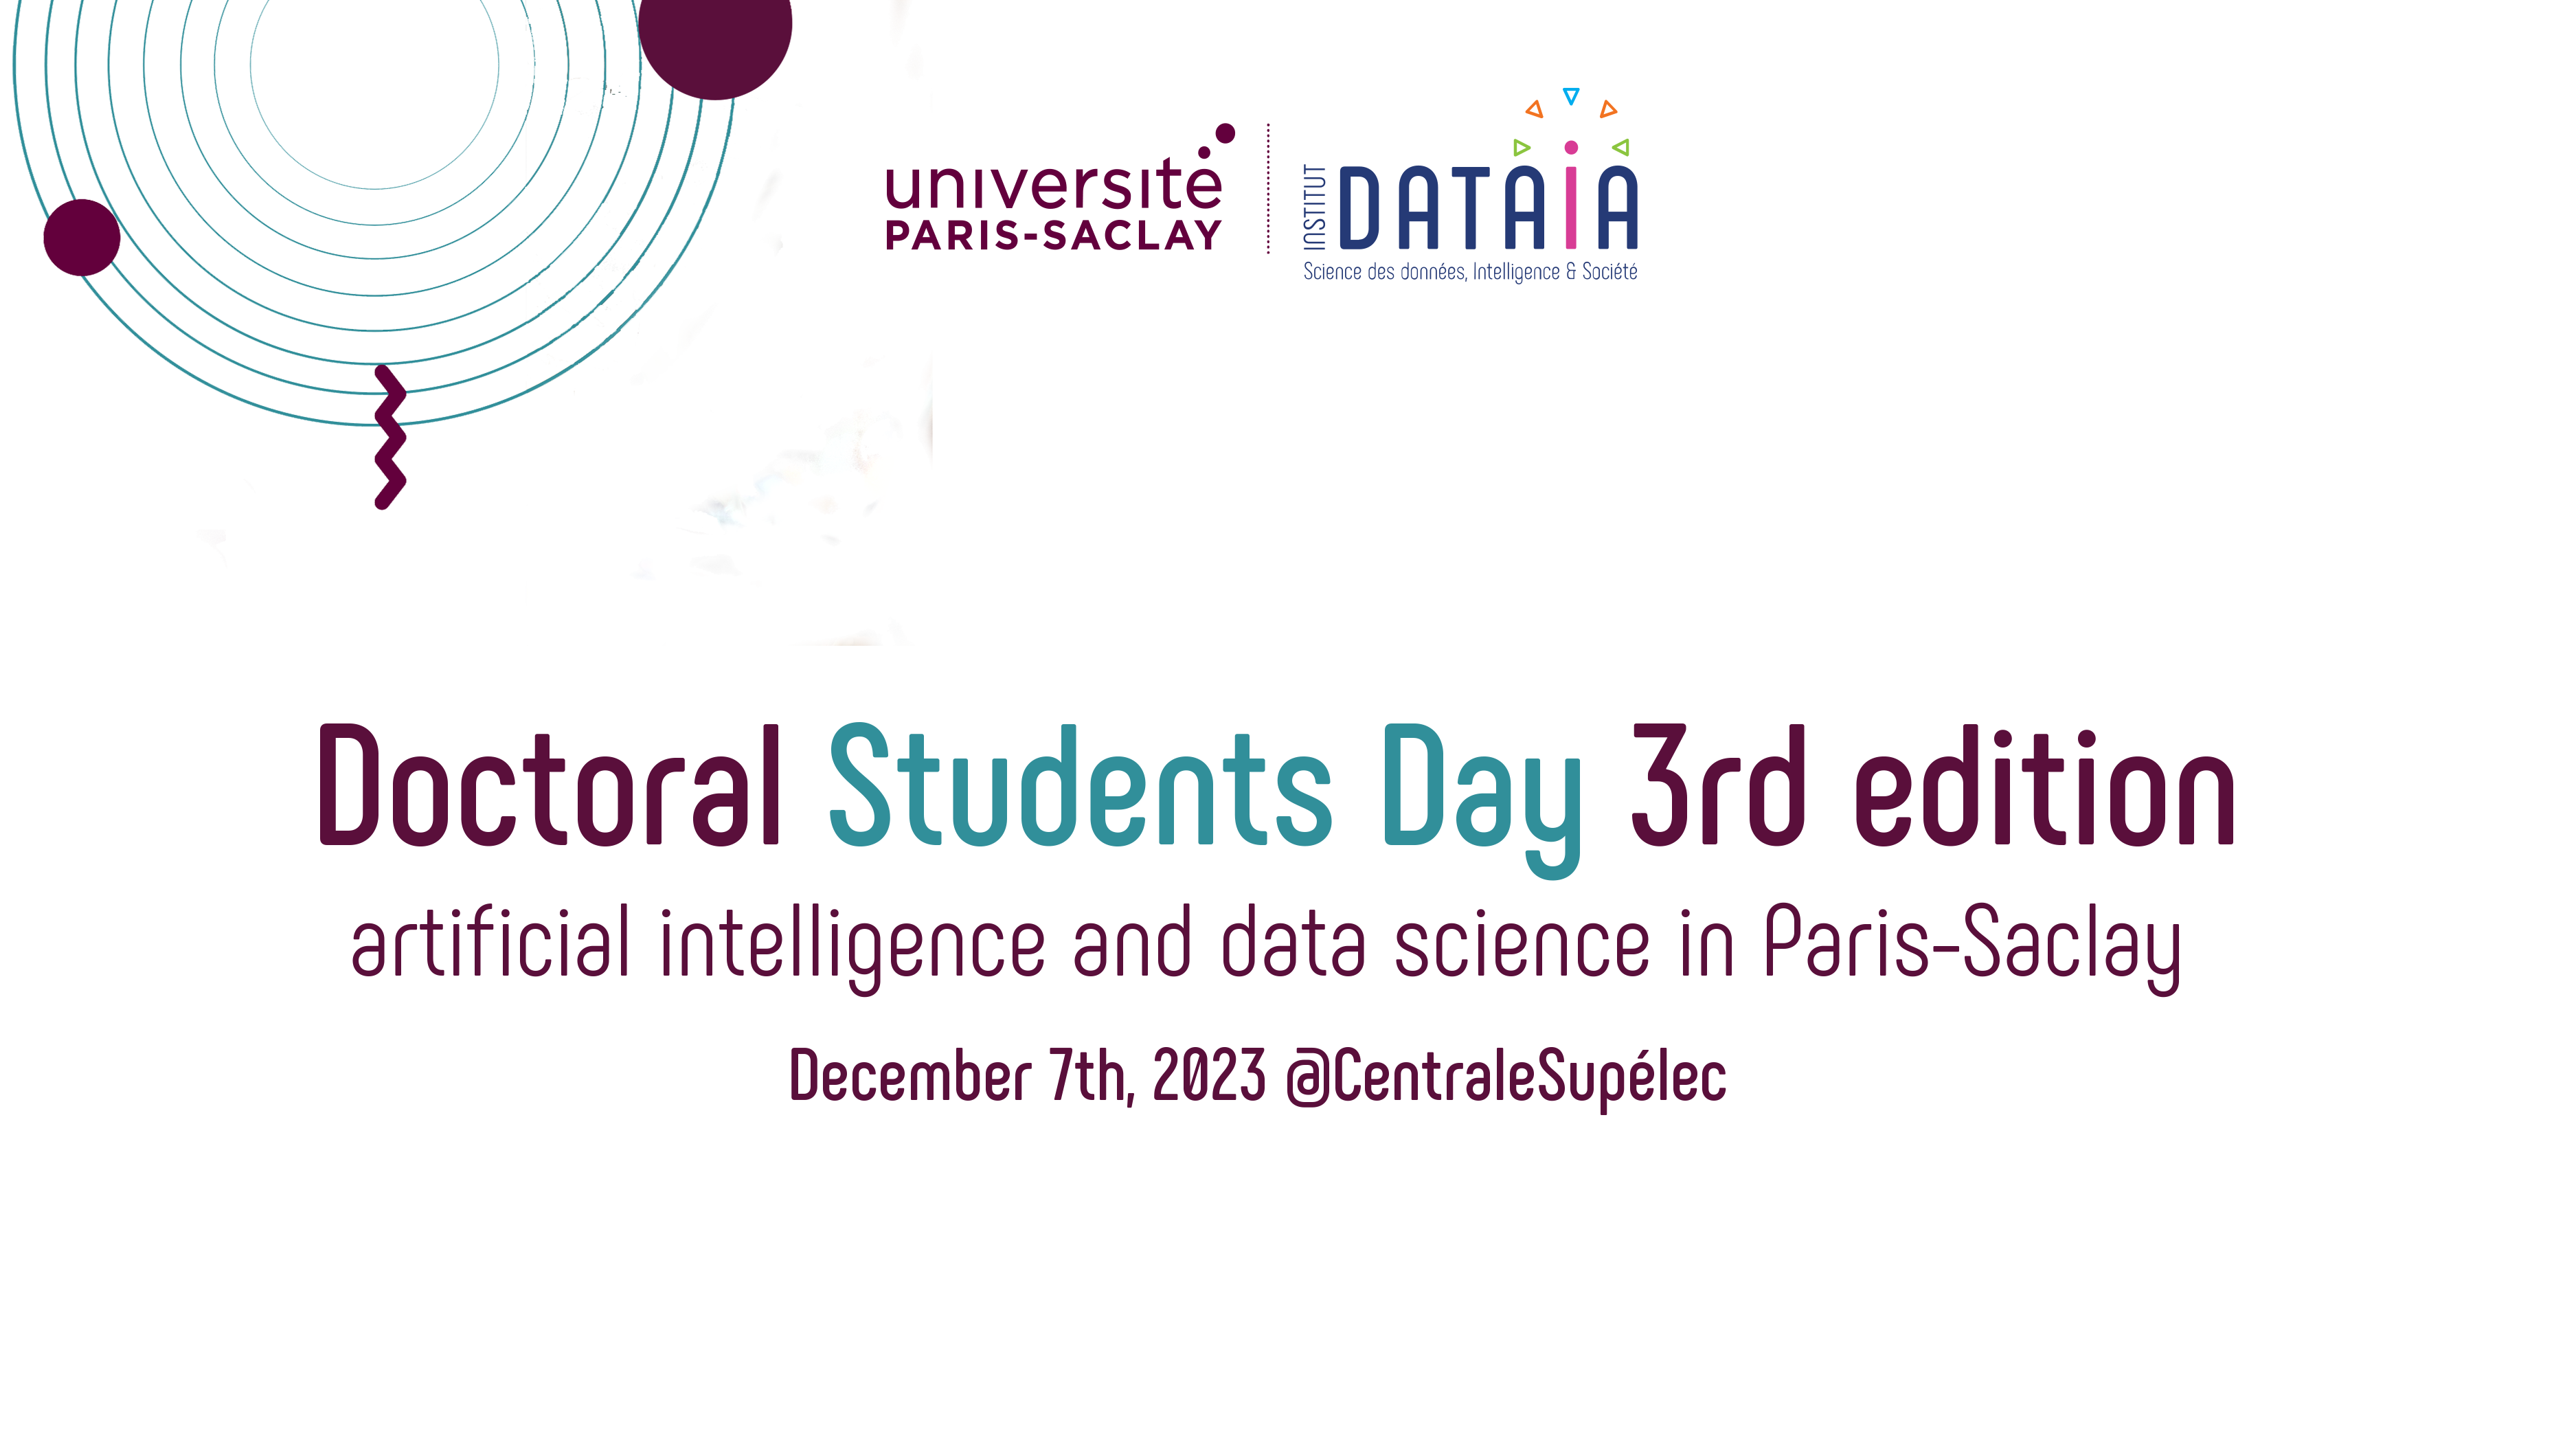 AI/data science Paris-Saclay students day - 3rd edition